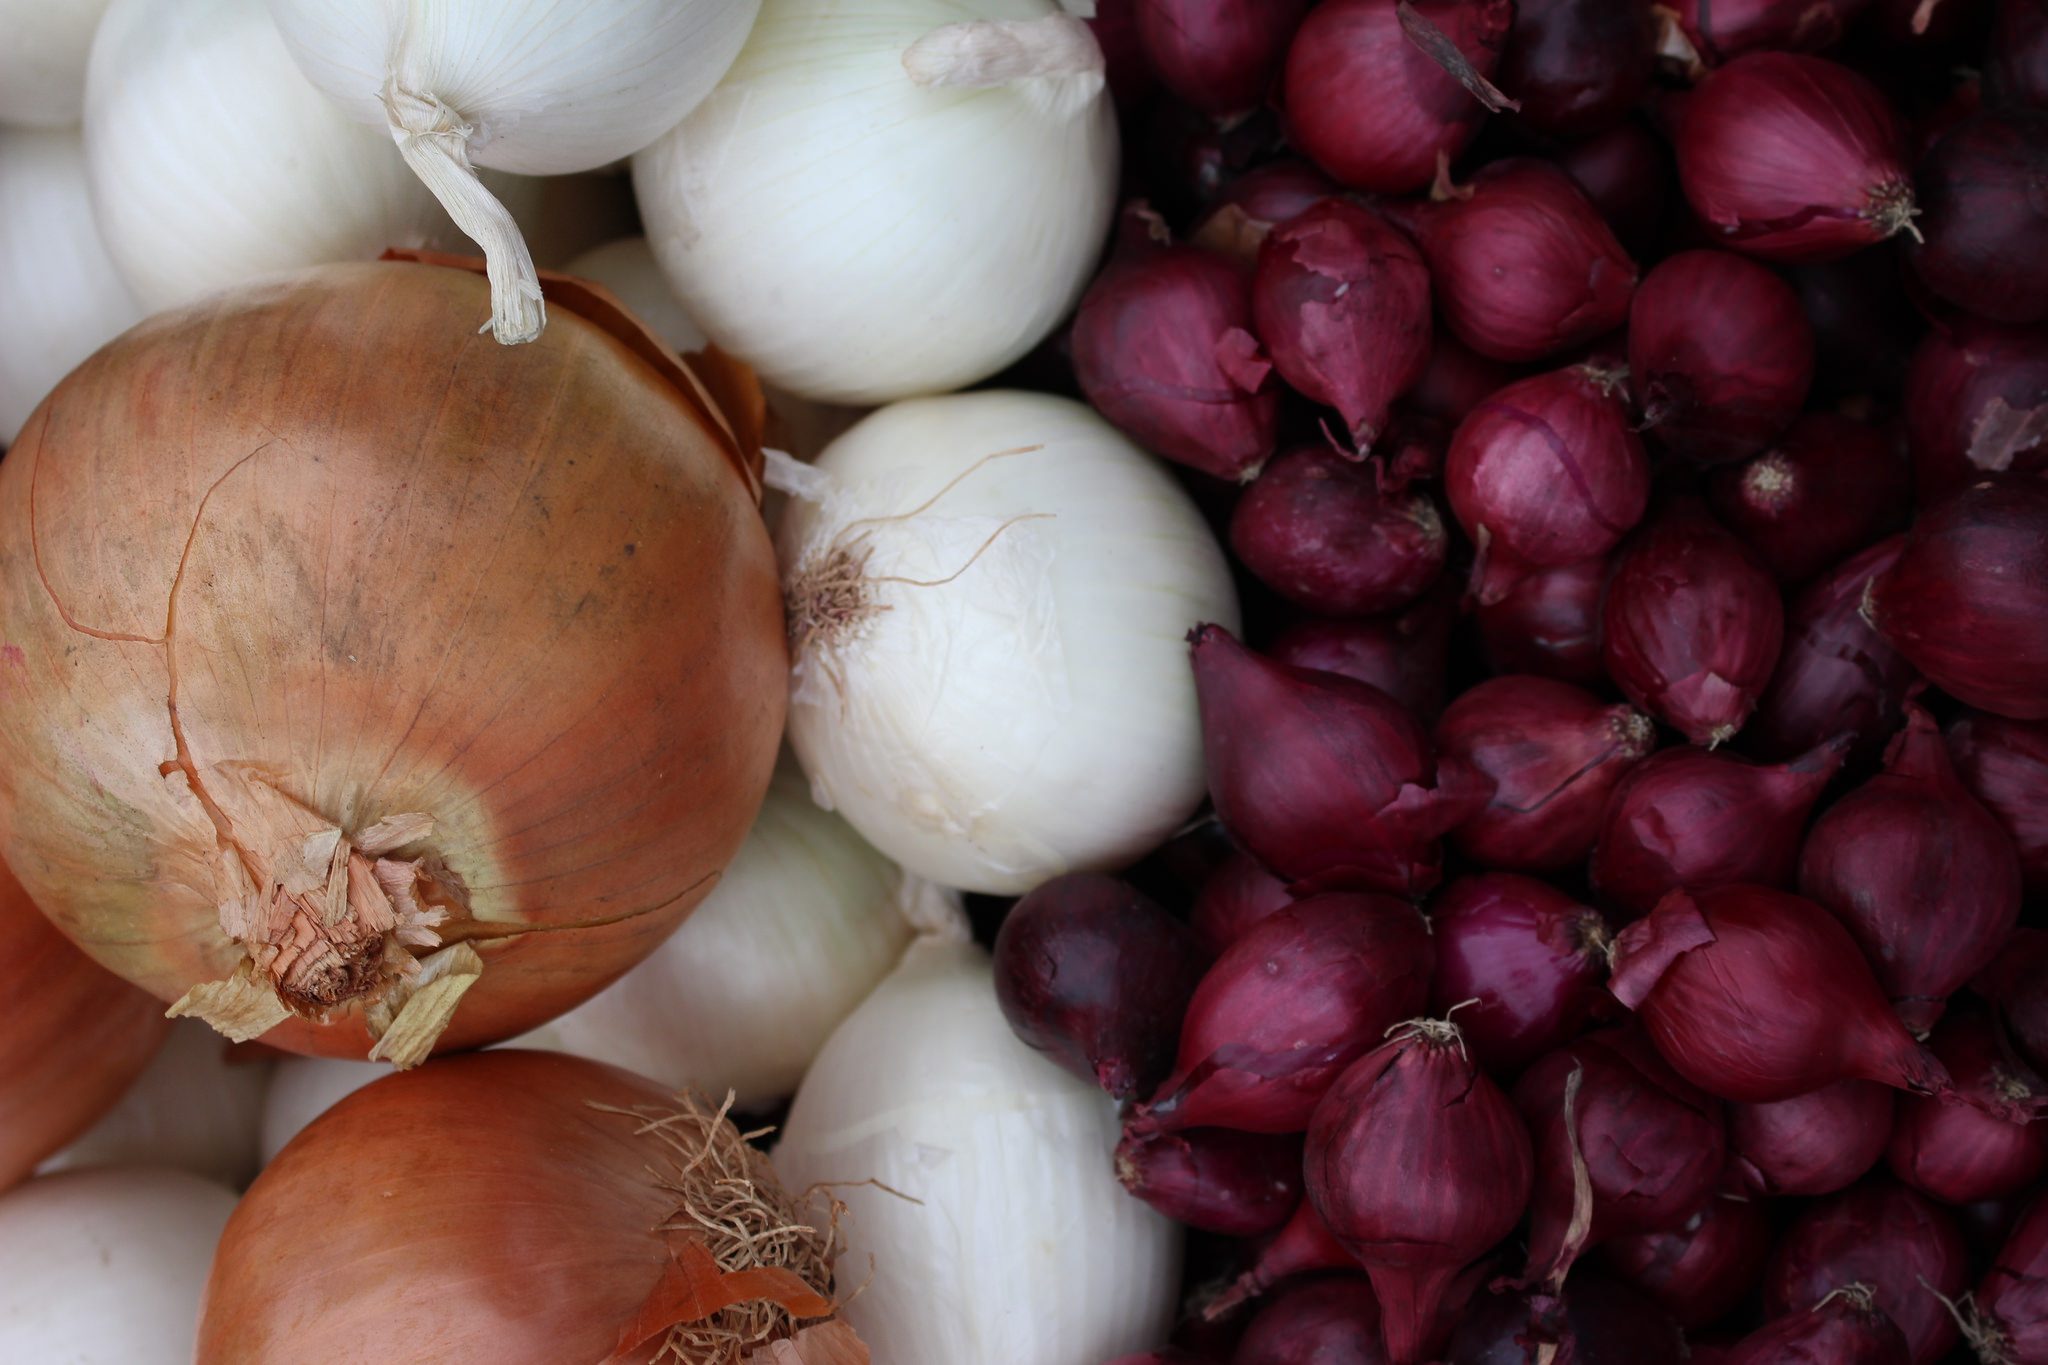 Health Benefits Of Onions That Many People Overlook